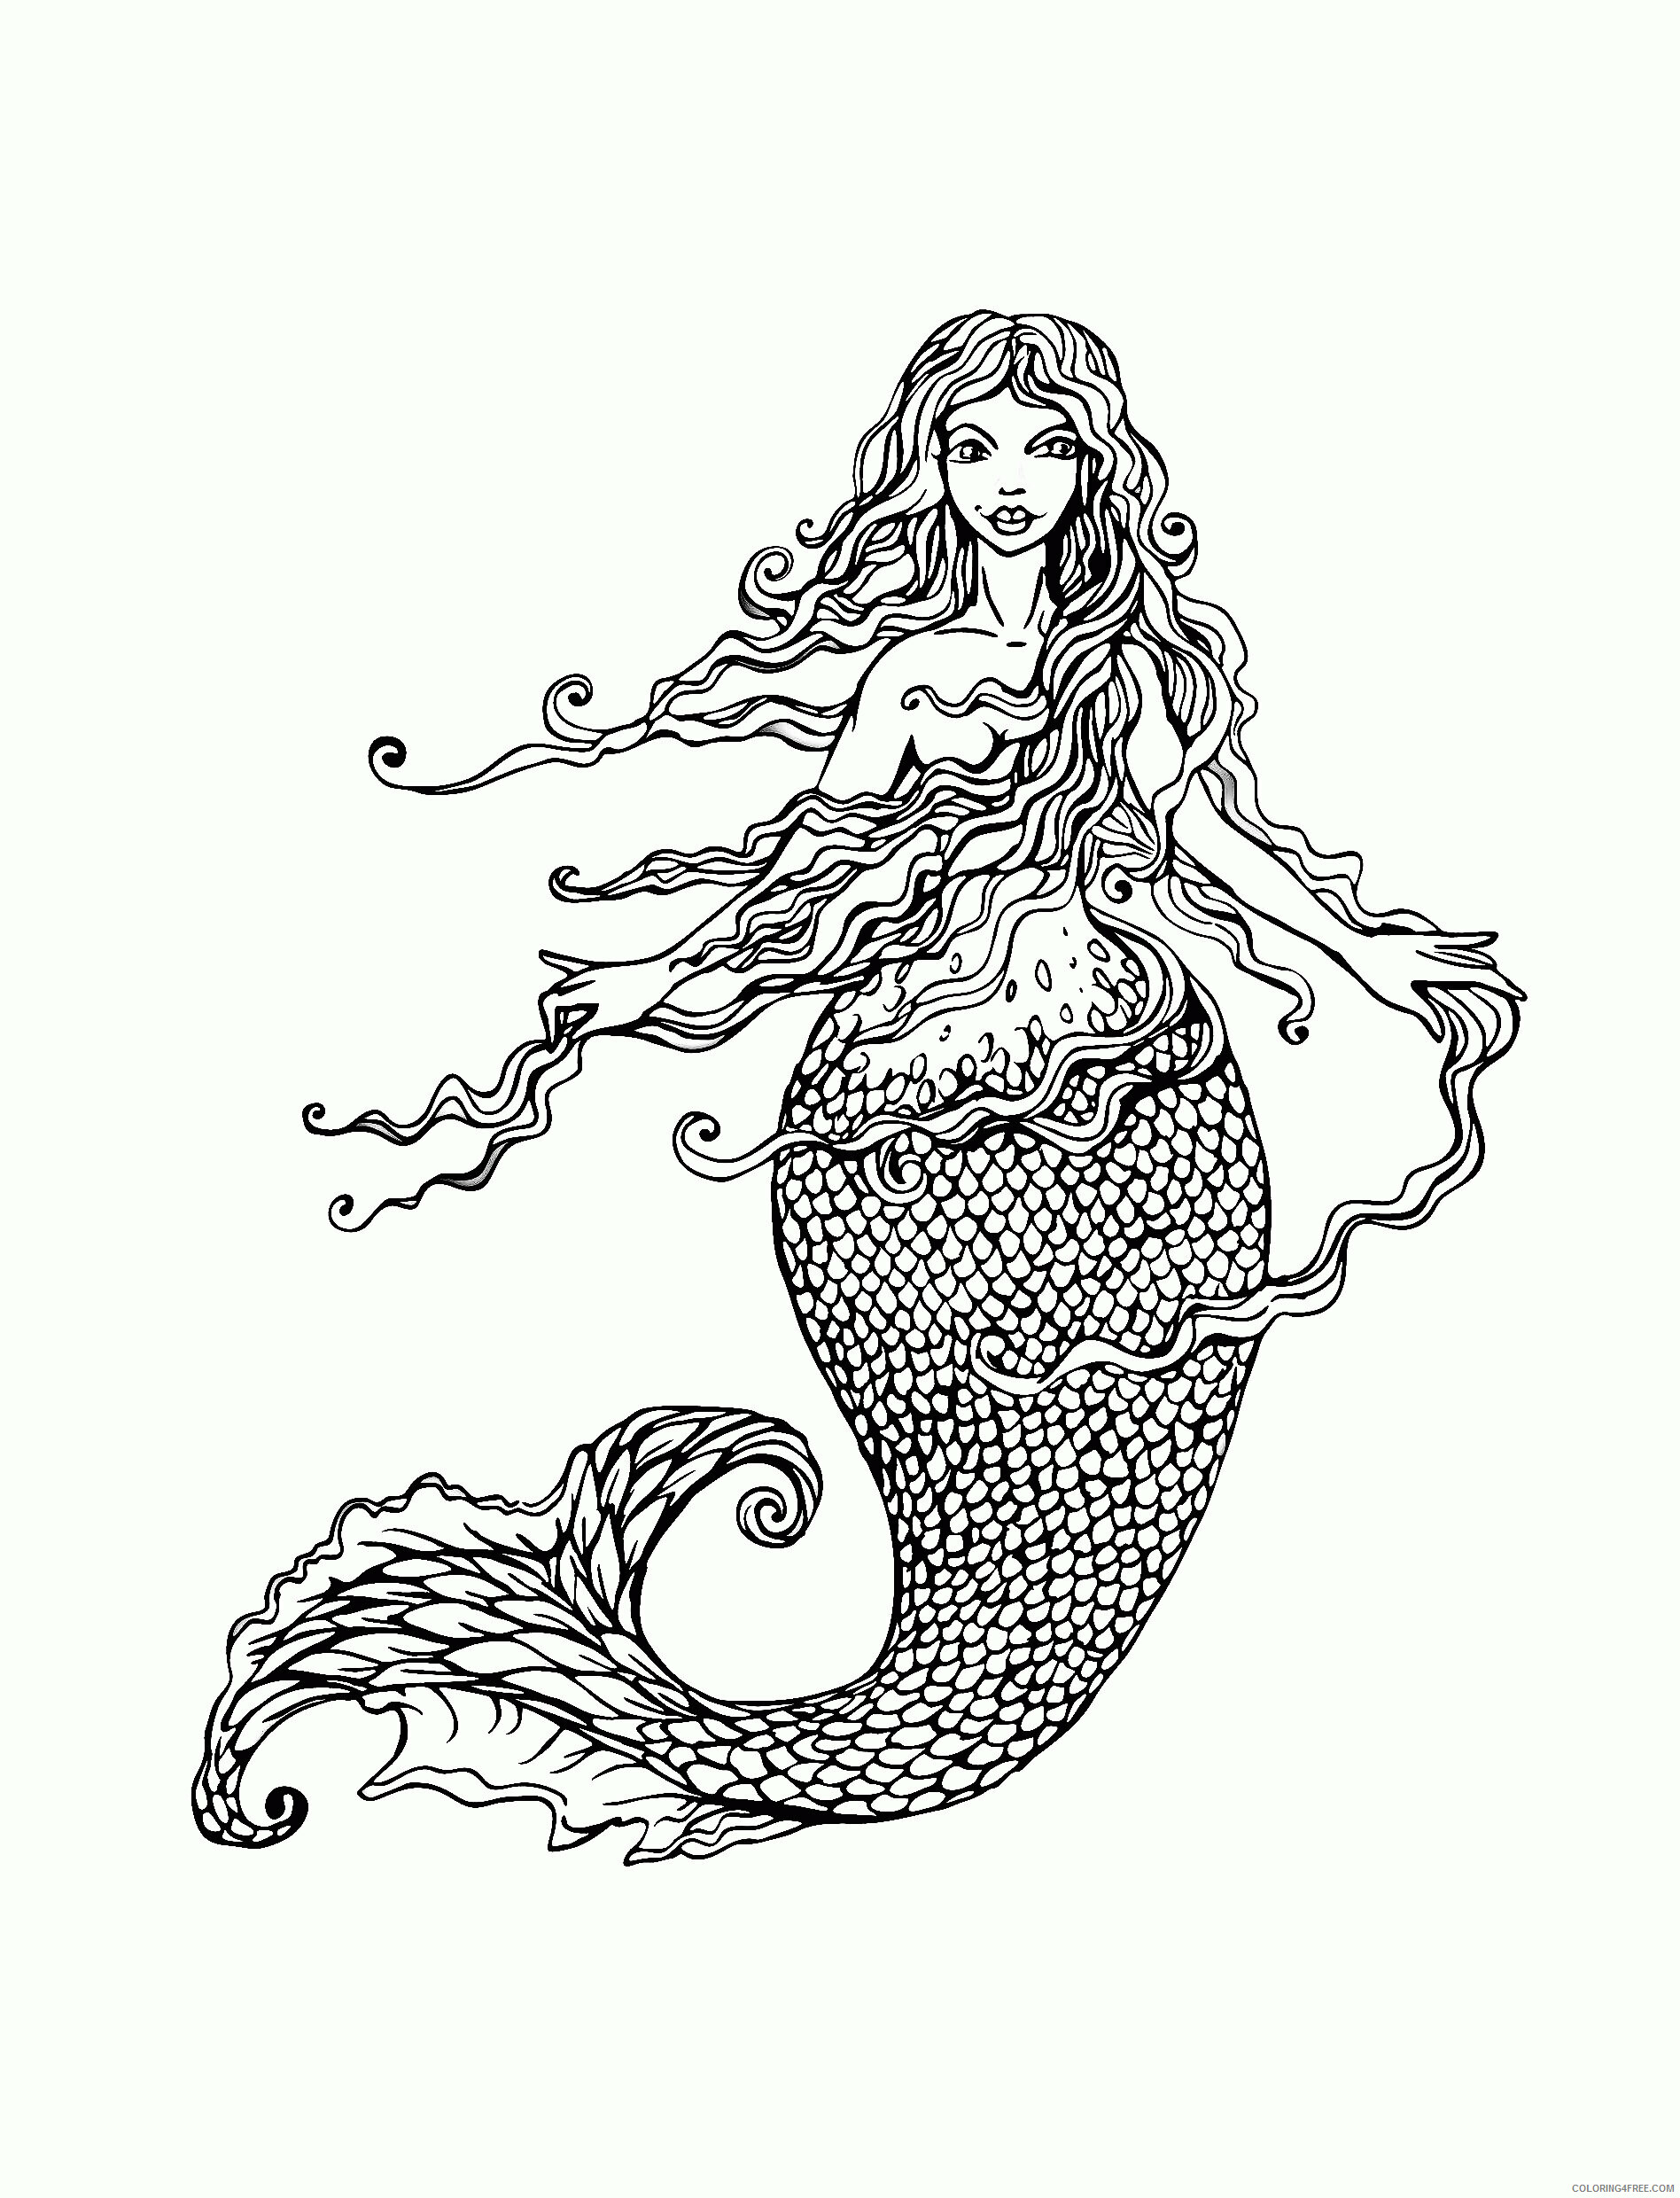 Adult Coloring Pages Mermaid Printable Sheets Water worlds for 2021 a 2031 Coloring4free